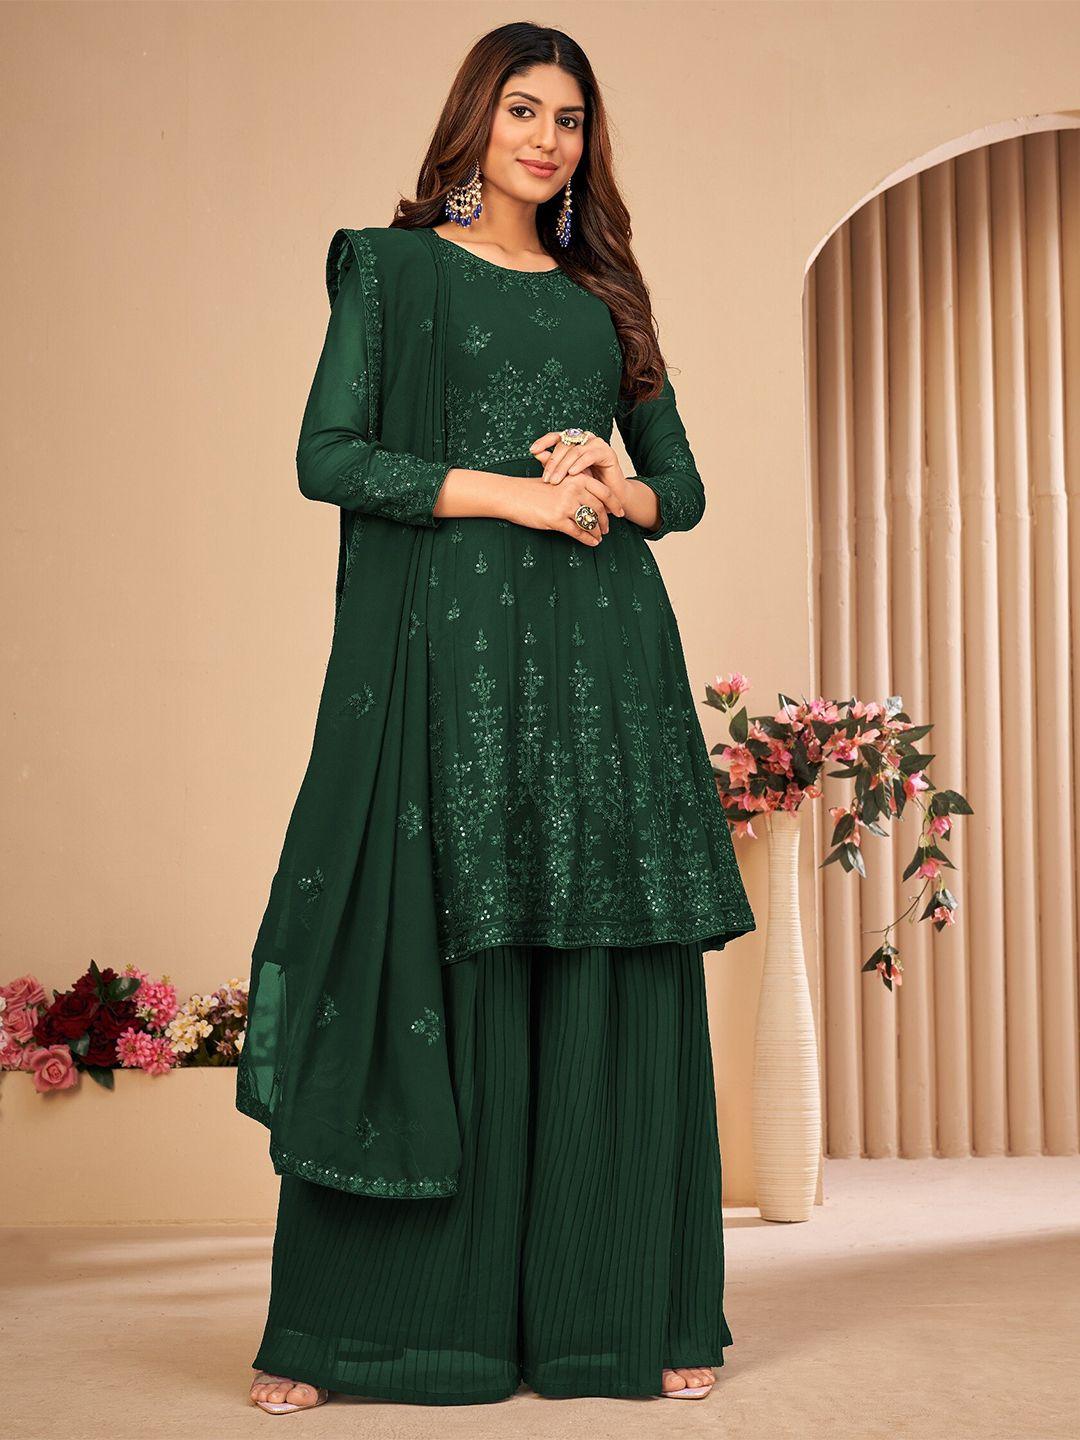 divine international trading co green embroidered unstitched dress material